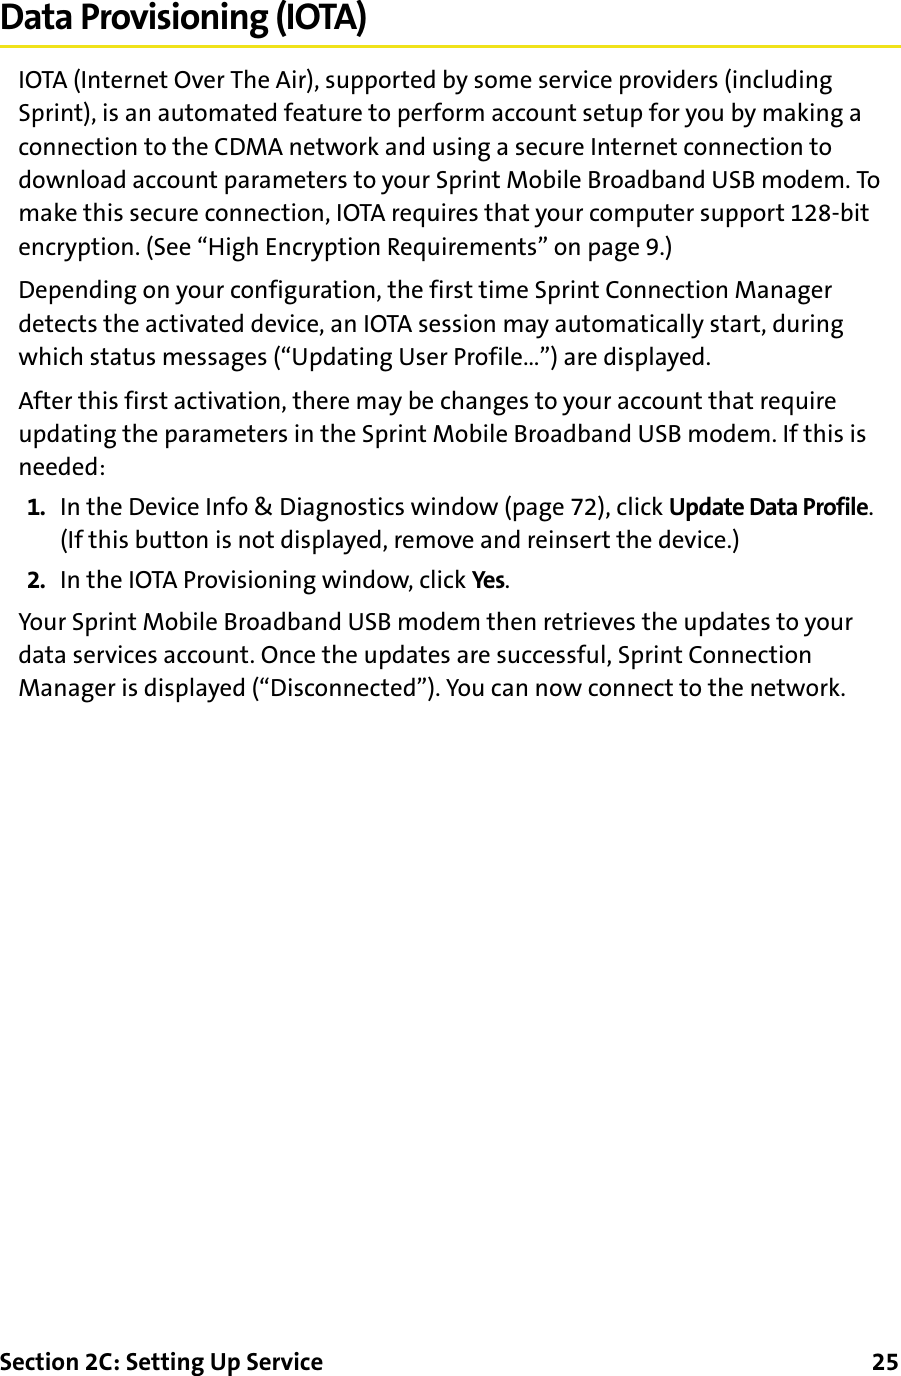 Section 2C: Setting Up Service      25Data Provisioning (IOTA)IOTA (Internet Over The Air), supported by some service providers (including Sprint), is an automated feature to perform account setup for you by making a connection to the CDMA network and using a secure Internet connection to download account parameters to your Sprint Mobile Broadband USB modem. To make this secure connection, IOTA requires that your computer support 128-bit encryption. (See “High Encryption Requirements” on page 9.)Depending on your configuration, the first time Sprint Connection Manager detects the activated device, an IOTA session may automatically start, during which status messages (“Updating User Profile…”) are displayed.After this first activation, there may be changes to your account that require updating the parameters in the Sprint Mobile Broadband USB modem. If this is needed:1. In the Device Info &amp; Diagnostics window (page 72), click Update Data Profile. (If this button is not displayed, remove and reinsert the device.)2. In the IOTA Provisioning window, click Yes.Your Sprint Mobile Broadband USB modem then retrieves the updates to your data services account. Once the updates are successful, Sprint Connection Manager is displayed (“Disconnected”). You can now connect to the network.